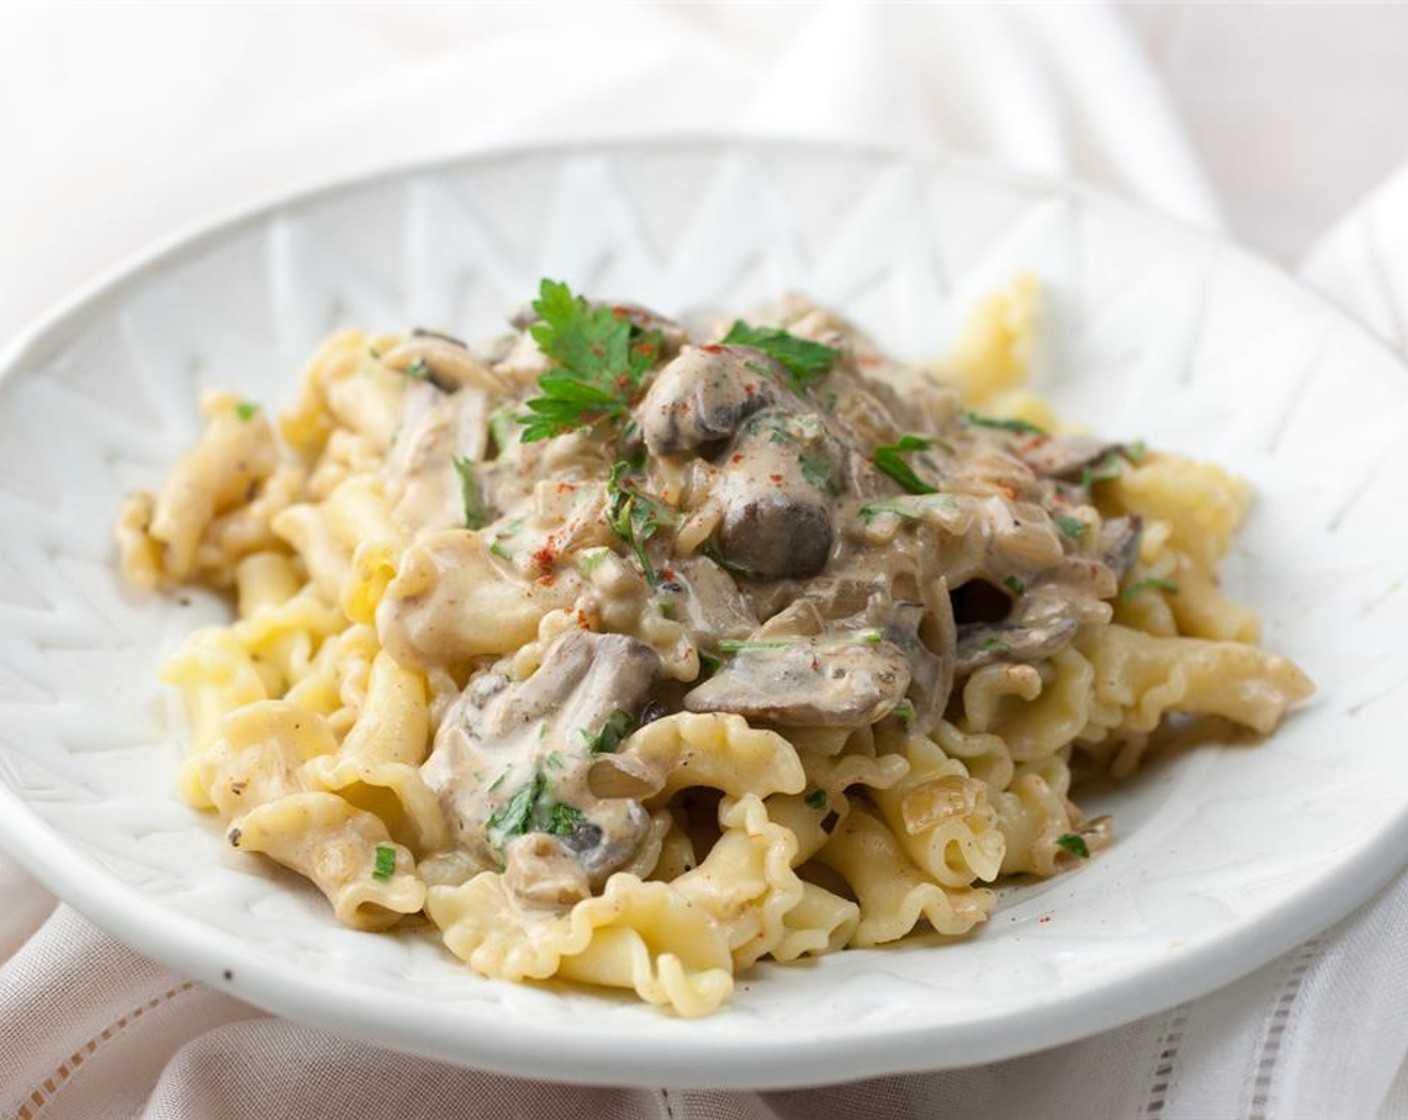 step 5 You can serve this stroganoff two ways. Either add in the pasta and Fresh Parsley (1/2 cup) to the mushrooms and toss to coat, or serve the mushroom mixture over the pasta and sprinkle parsley on top.